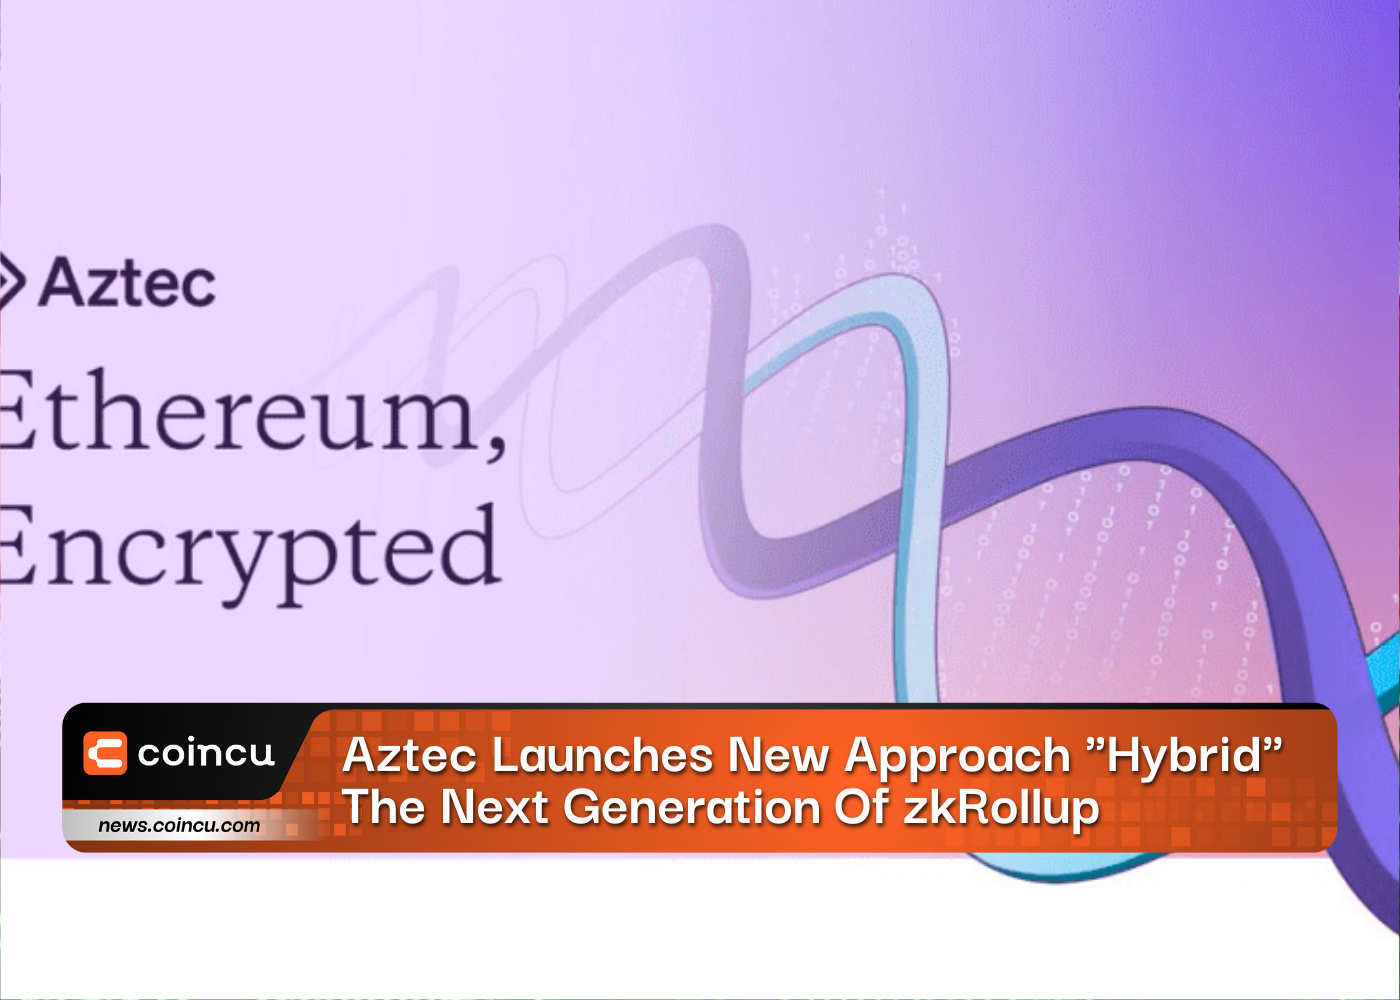 Aztec Launches New Approach "Hybrid", The Next Generation Of zkRollup